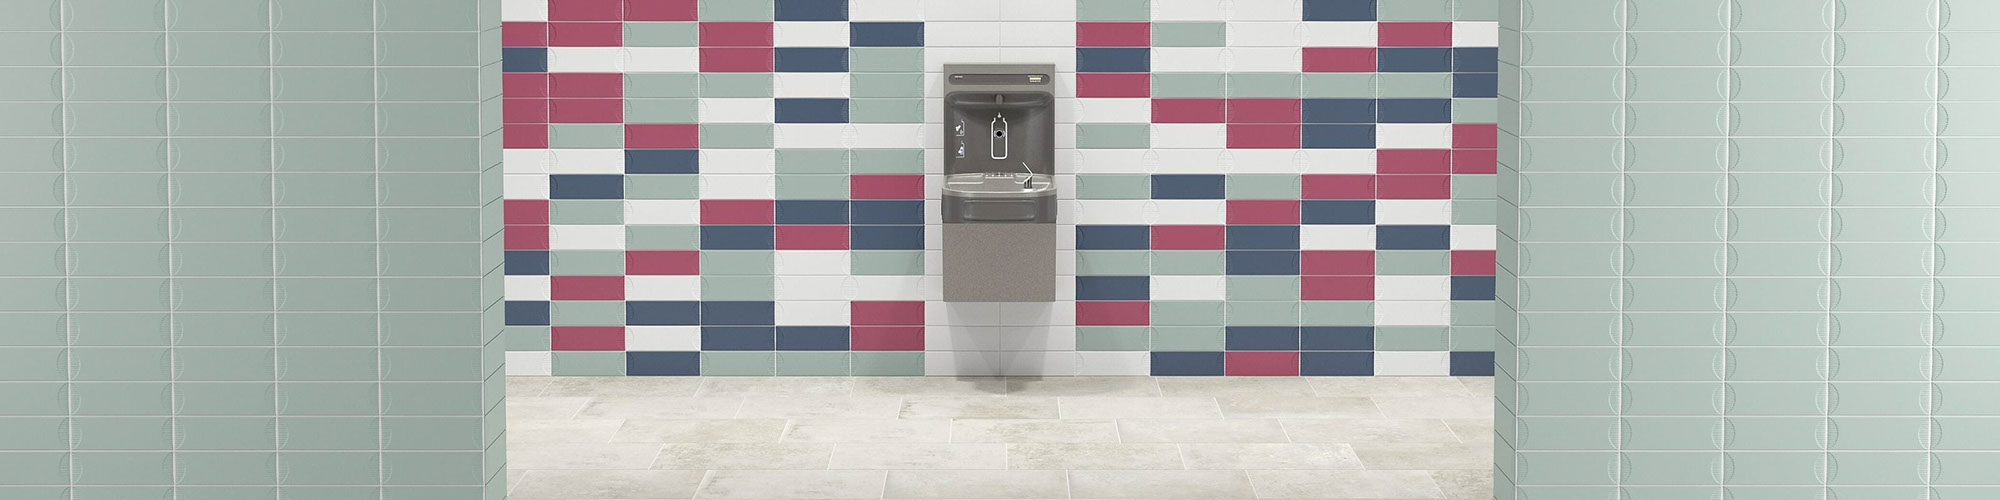 School restroom with beige slip-resistant floor tile with antimicrobial properties, mint green wall tile, water fountain mounted on wall with blue, pink, and mint tile.